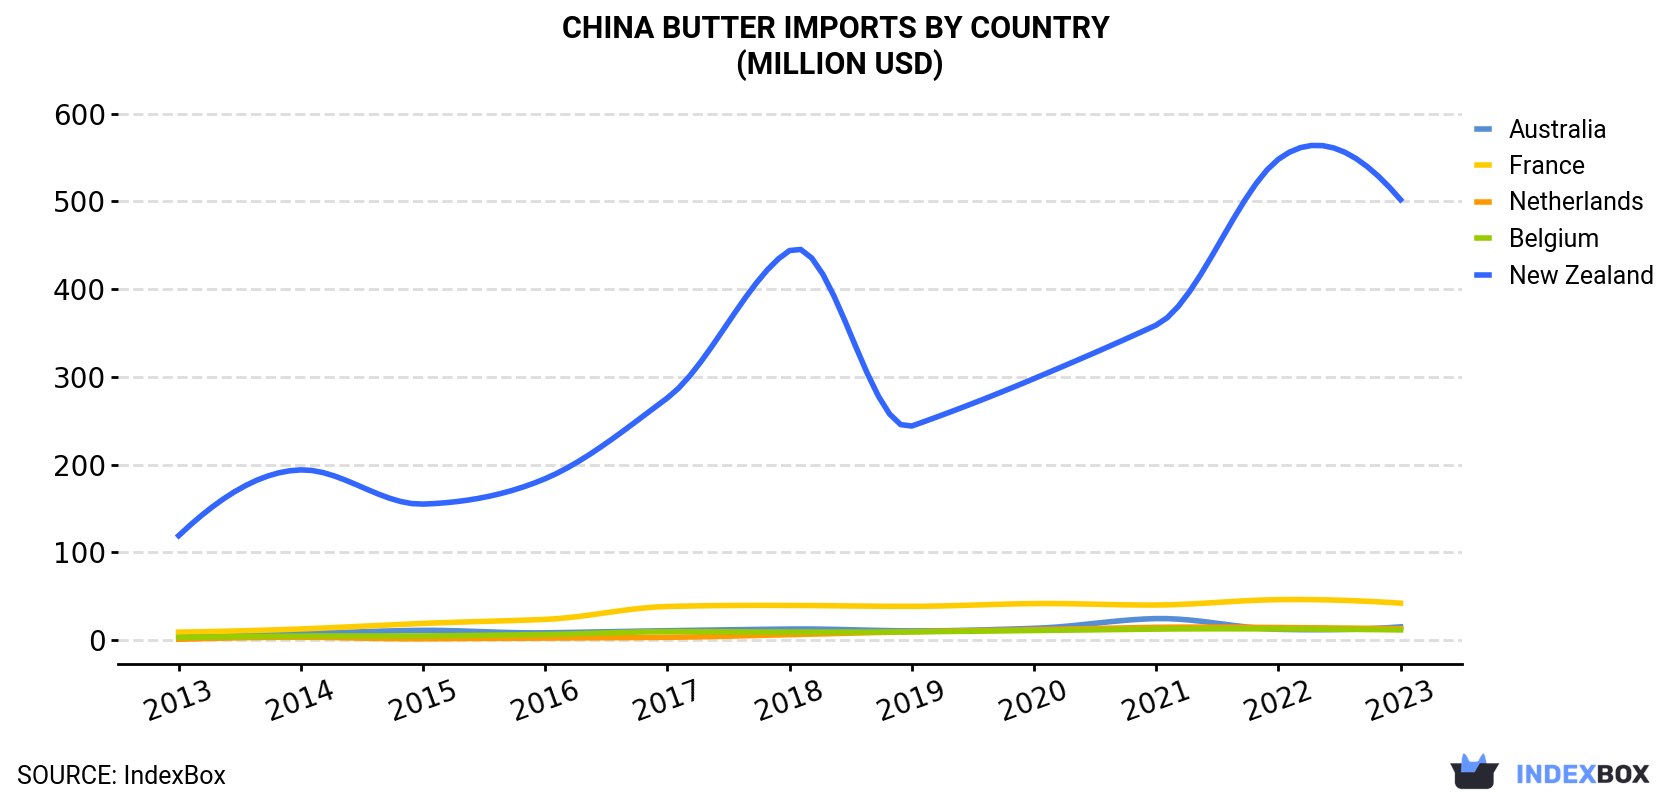 China Butter Imports By Country (Million USD)